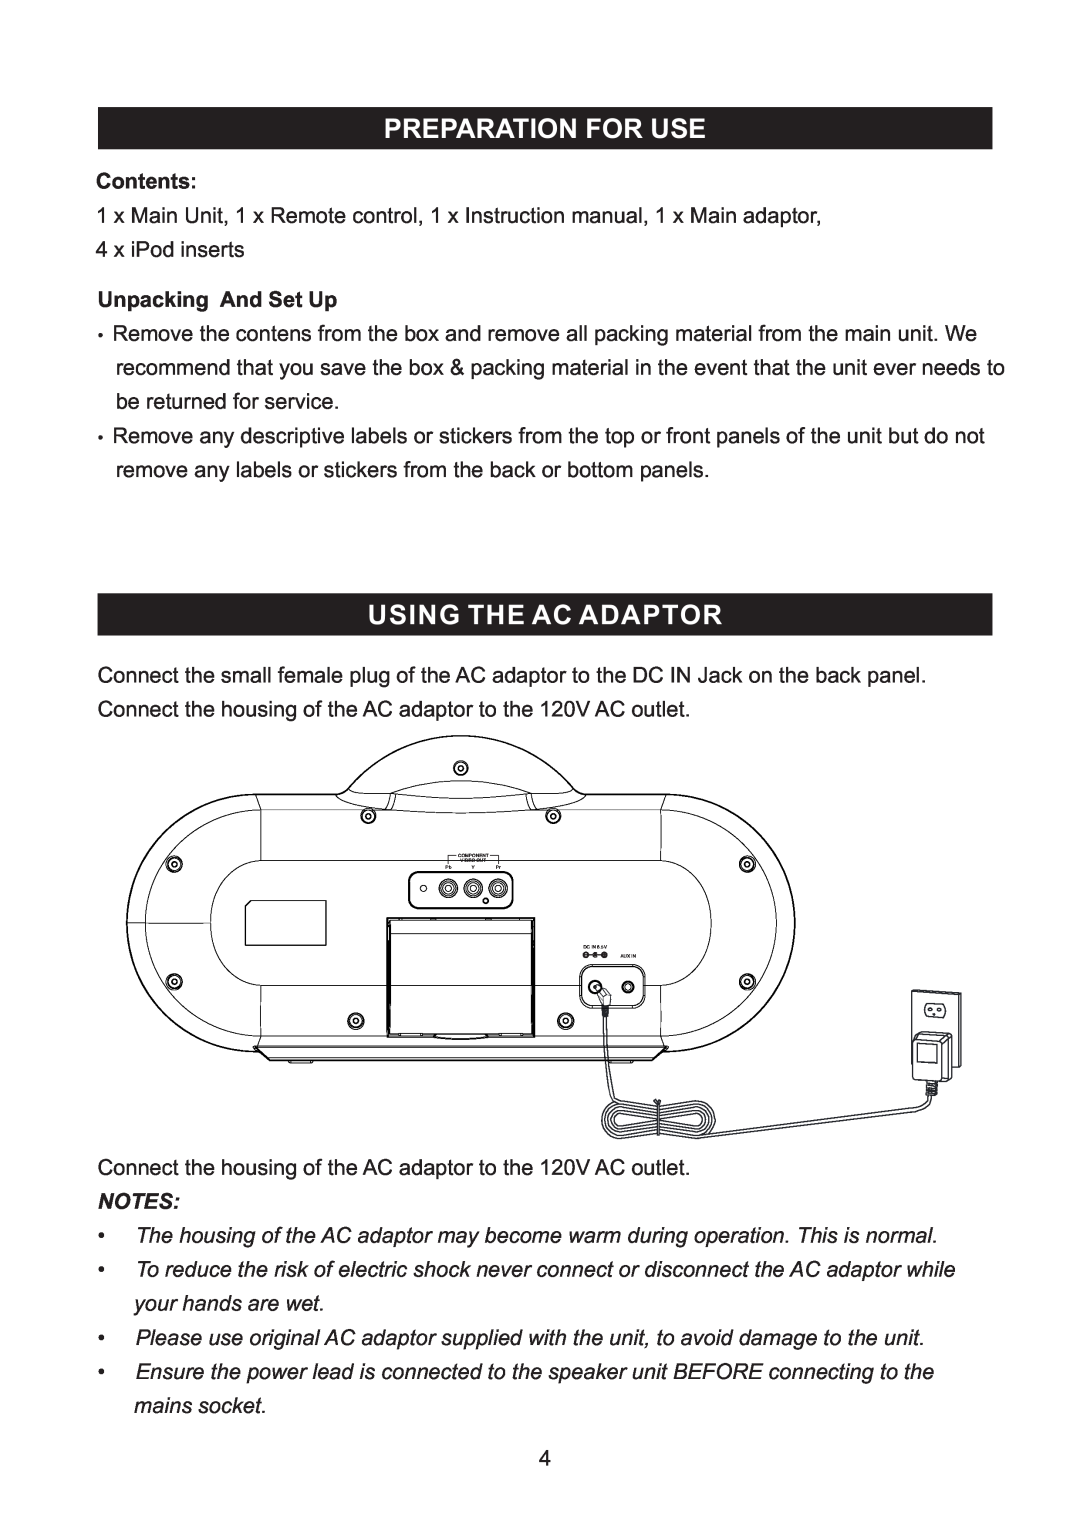 Haier IPDS-10 user manual Preparation For Use, Using The Ac Adaptor, Contents, Unpacking And Set Up 